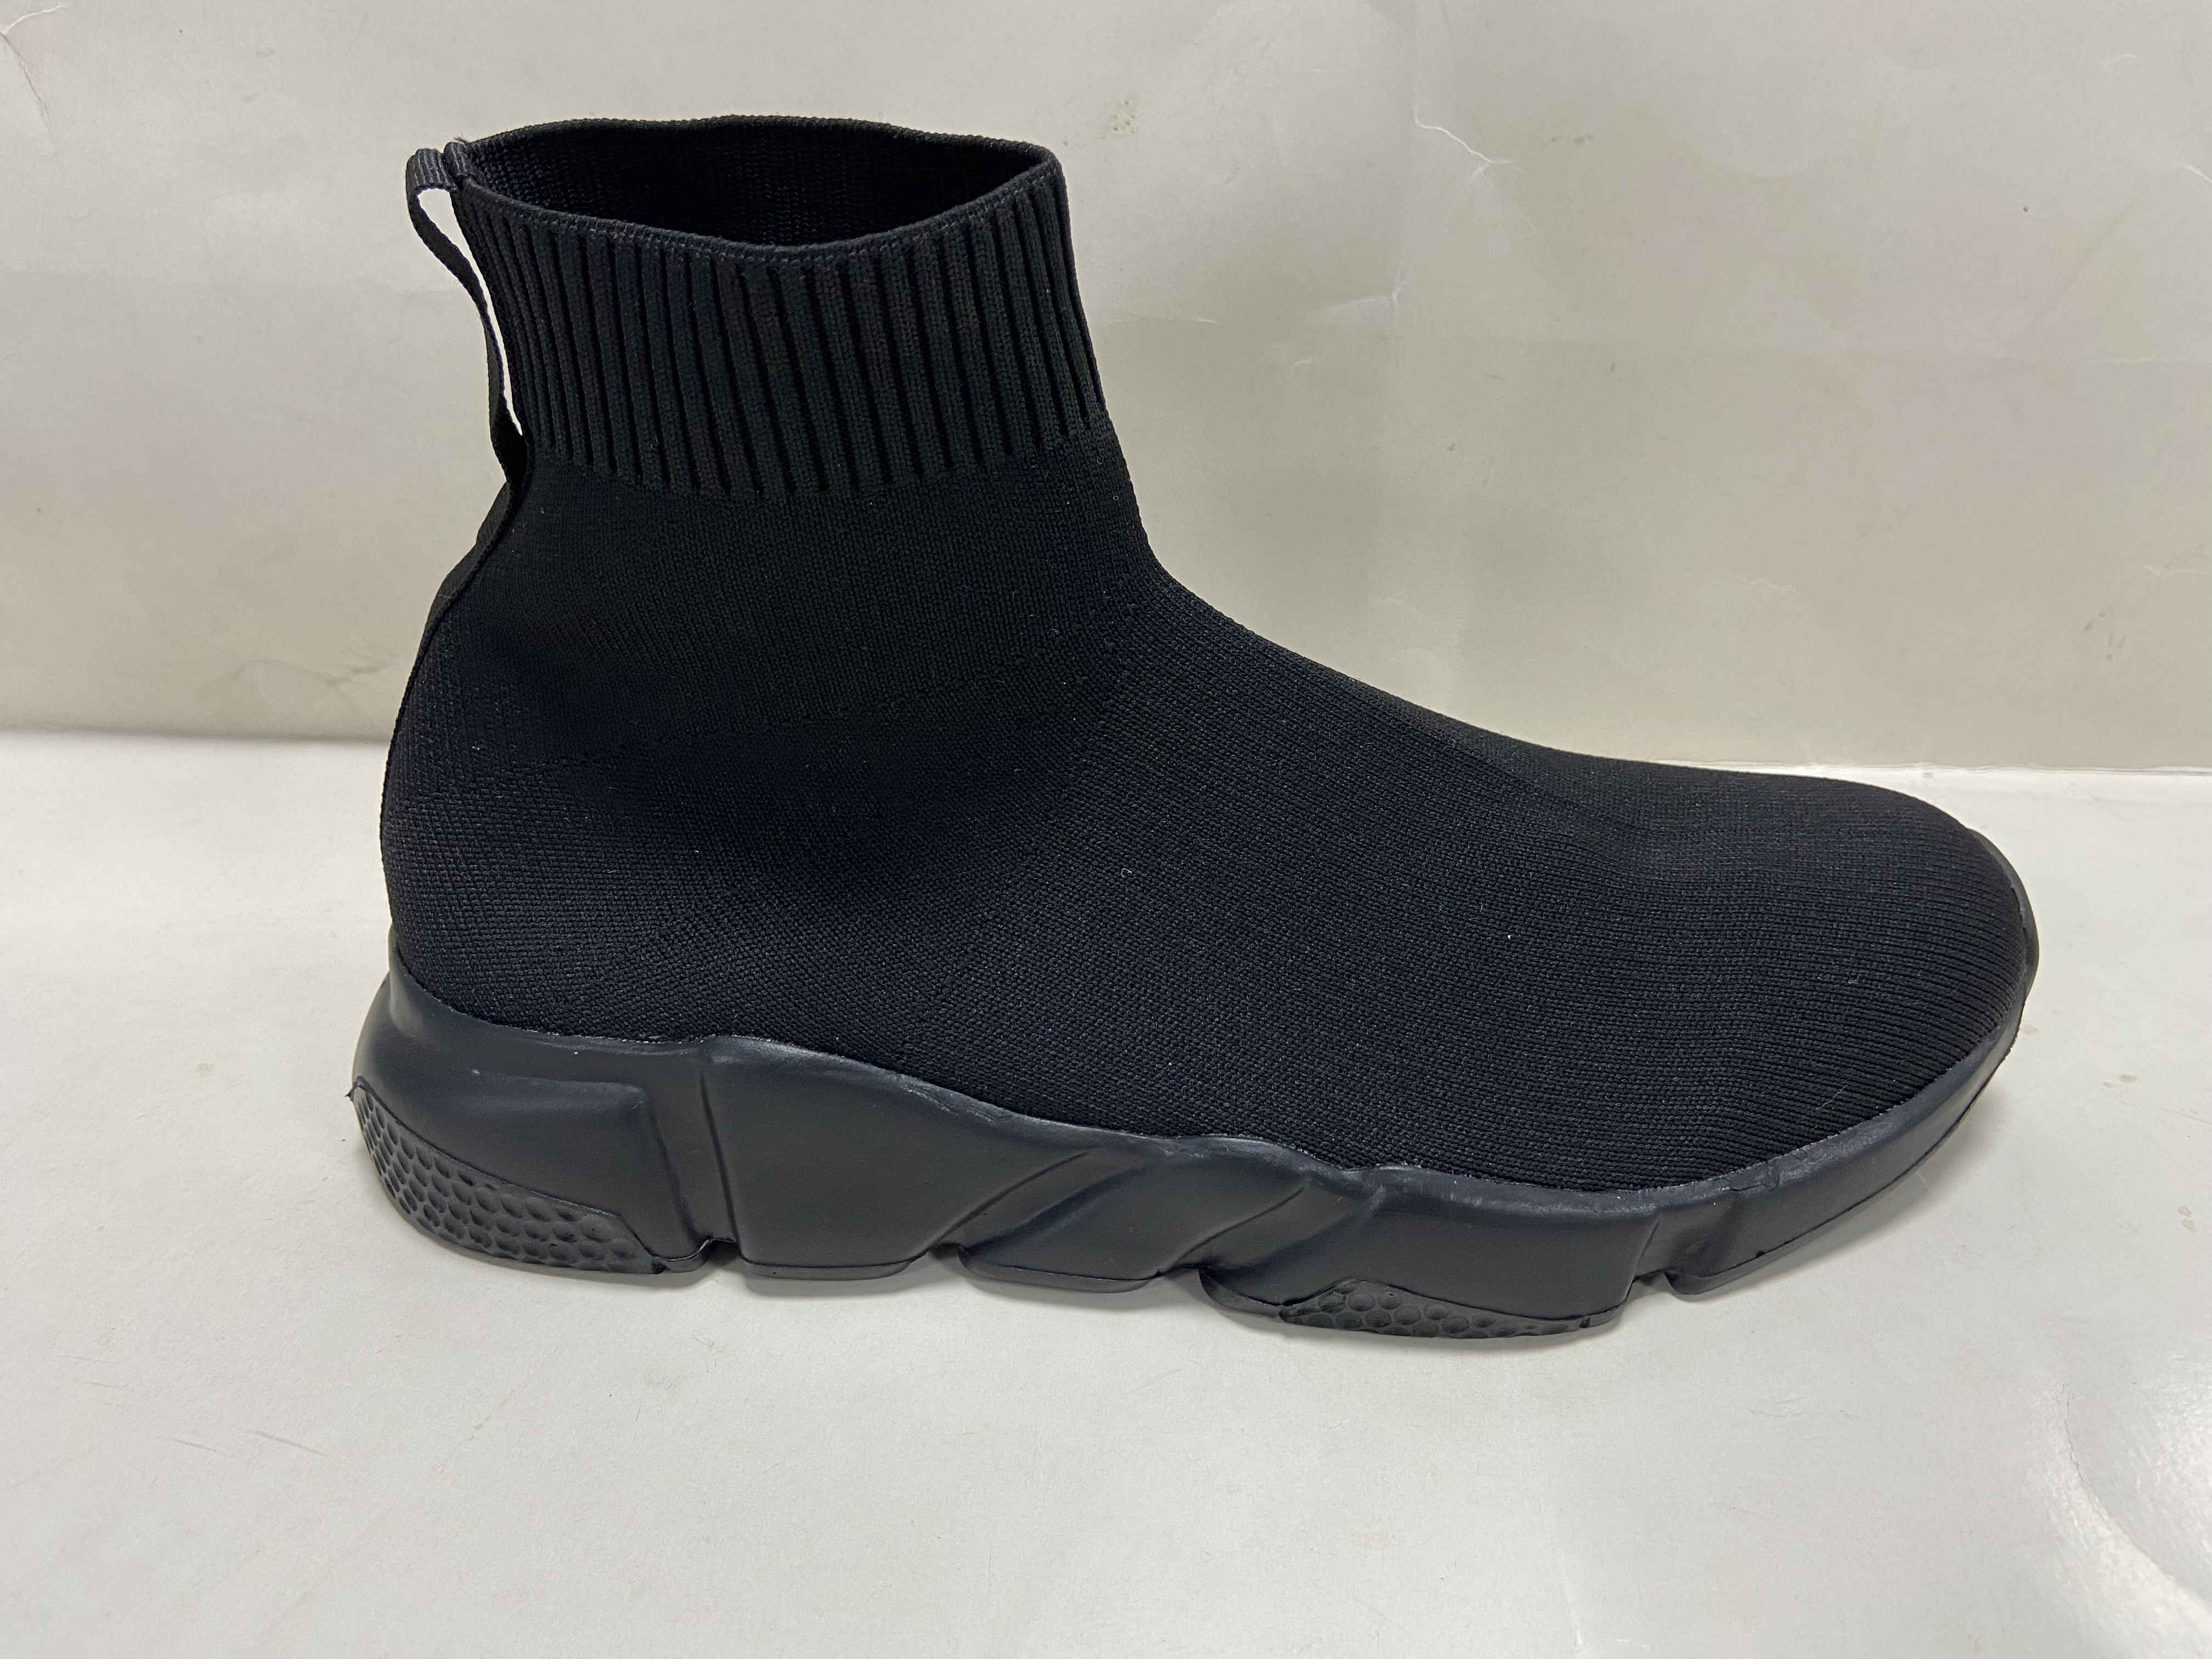 Men's Boys' High-Top Sock Sneaker with Extra Ankle Support Slip-On Shoes